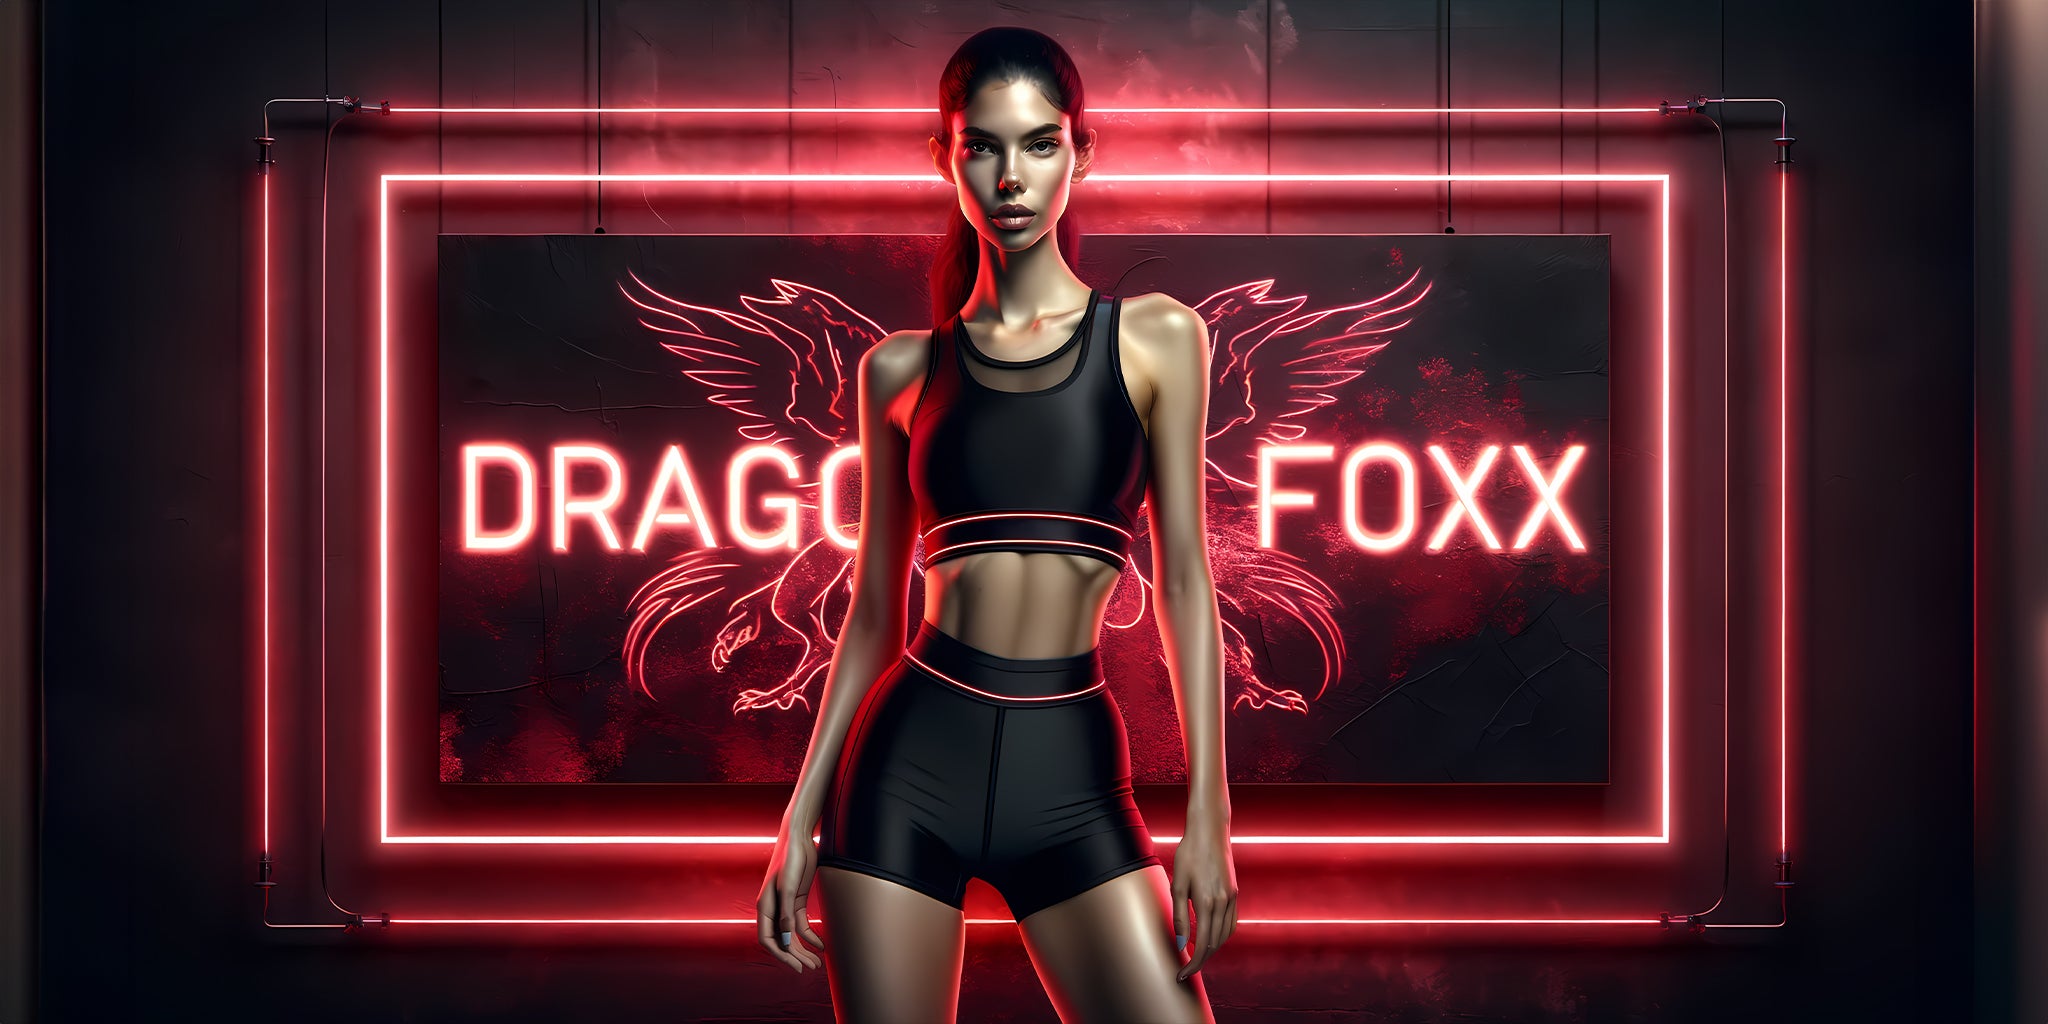 Dragon Foxx™ Women's Activewear Banner- Featuring a Hispanic woman wearing black spandex gym shorts and matching sports bra standing in front of a black grunge wall light up with red neon lights.